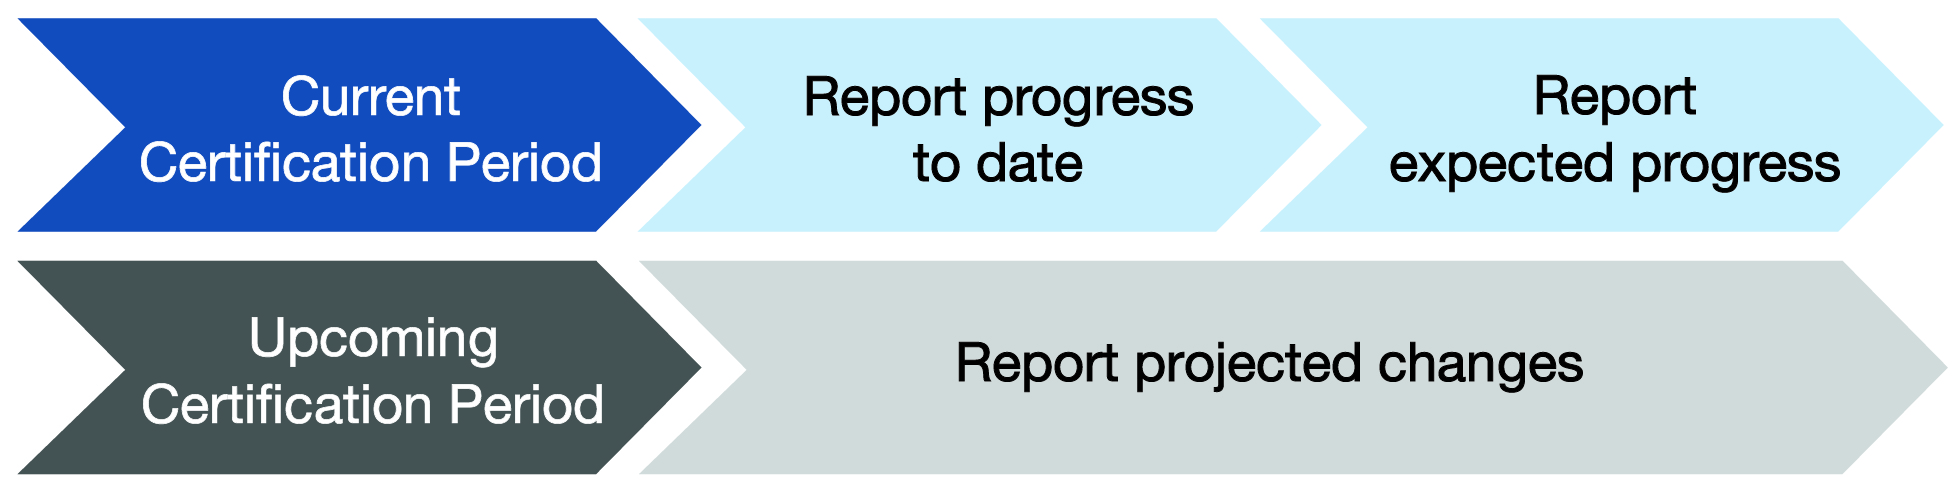 Current certification period: report progress to date > report expected progress. Upcoming certification period: report projected changes.